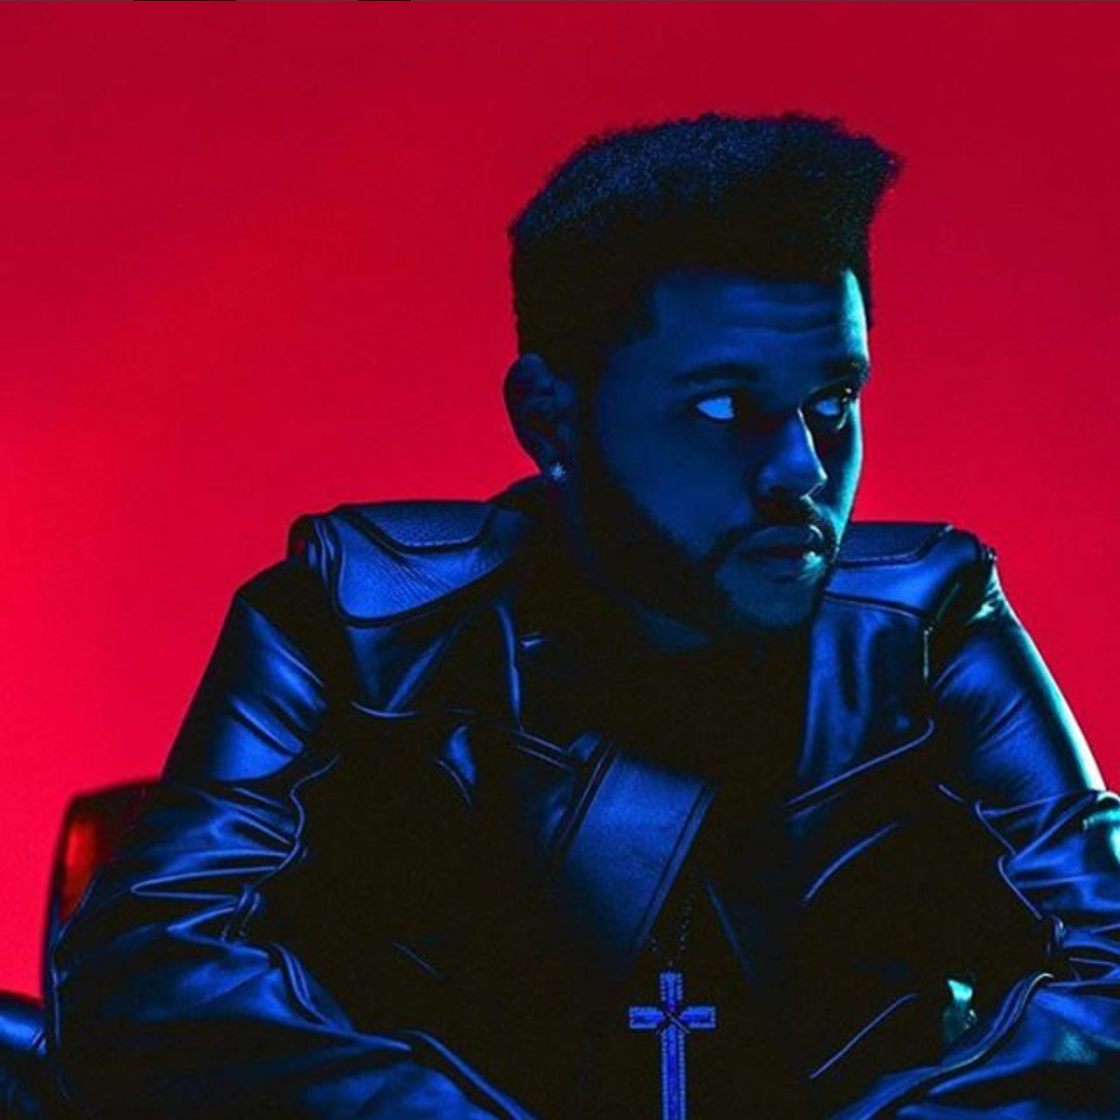 The Weeknd - Starboy ft. Daft Punk (Official Video) 